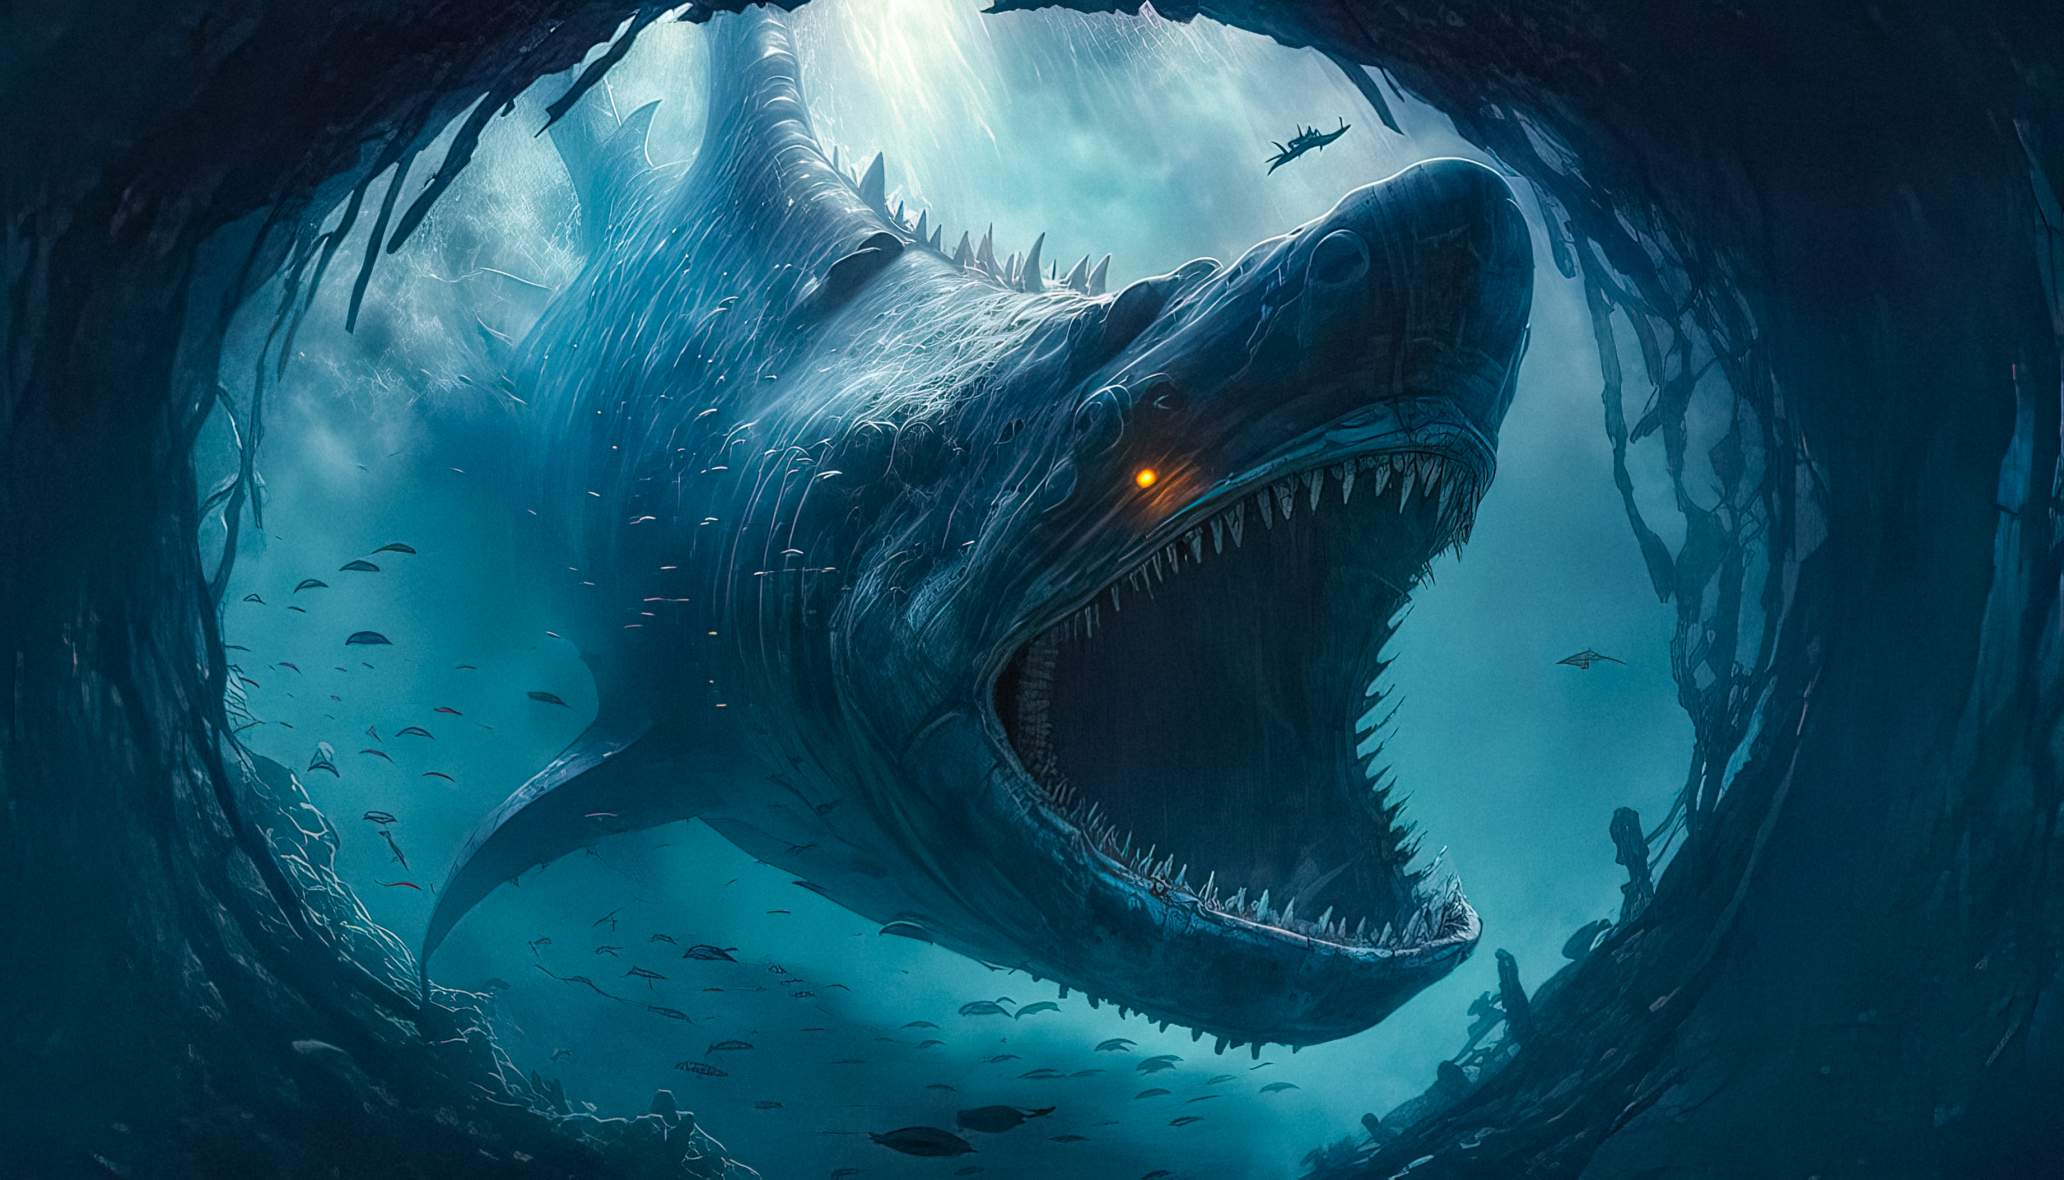 Leviathan: Impossible to defeat this ancient sea monster! 2